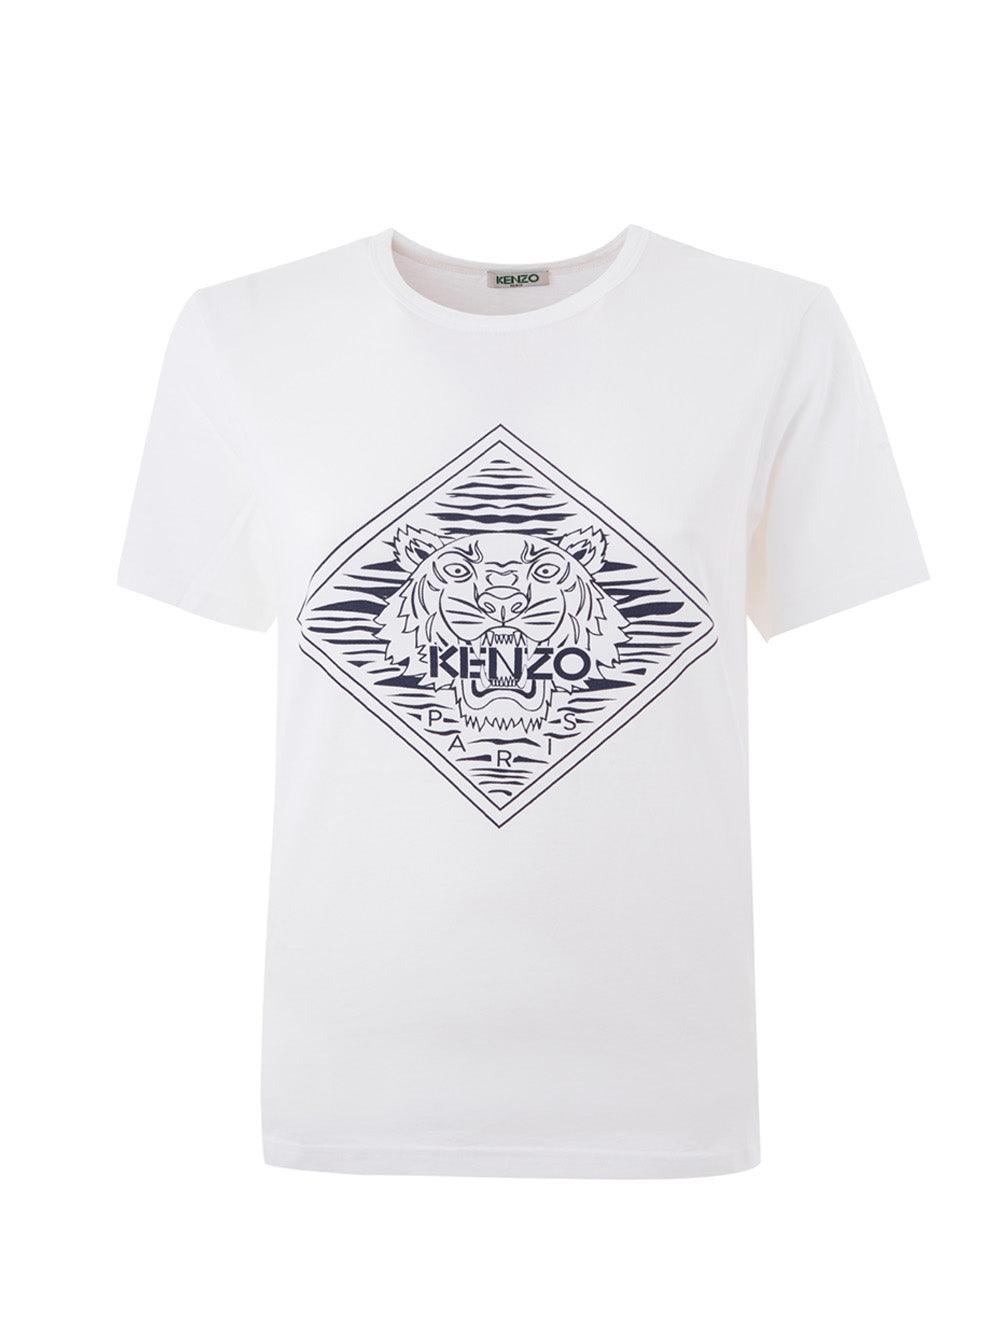 Kenzo White Cotton T-Shirt with Contrasting Front Logo - Ellie Belle